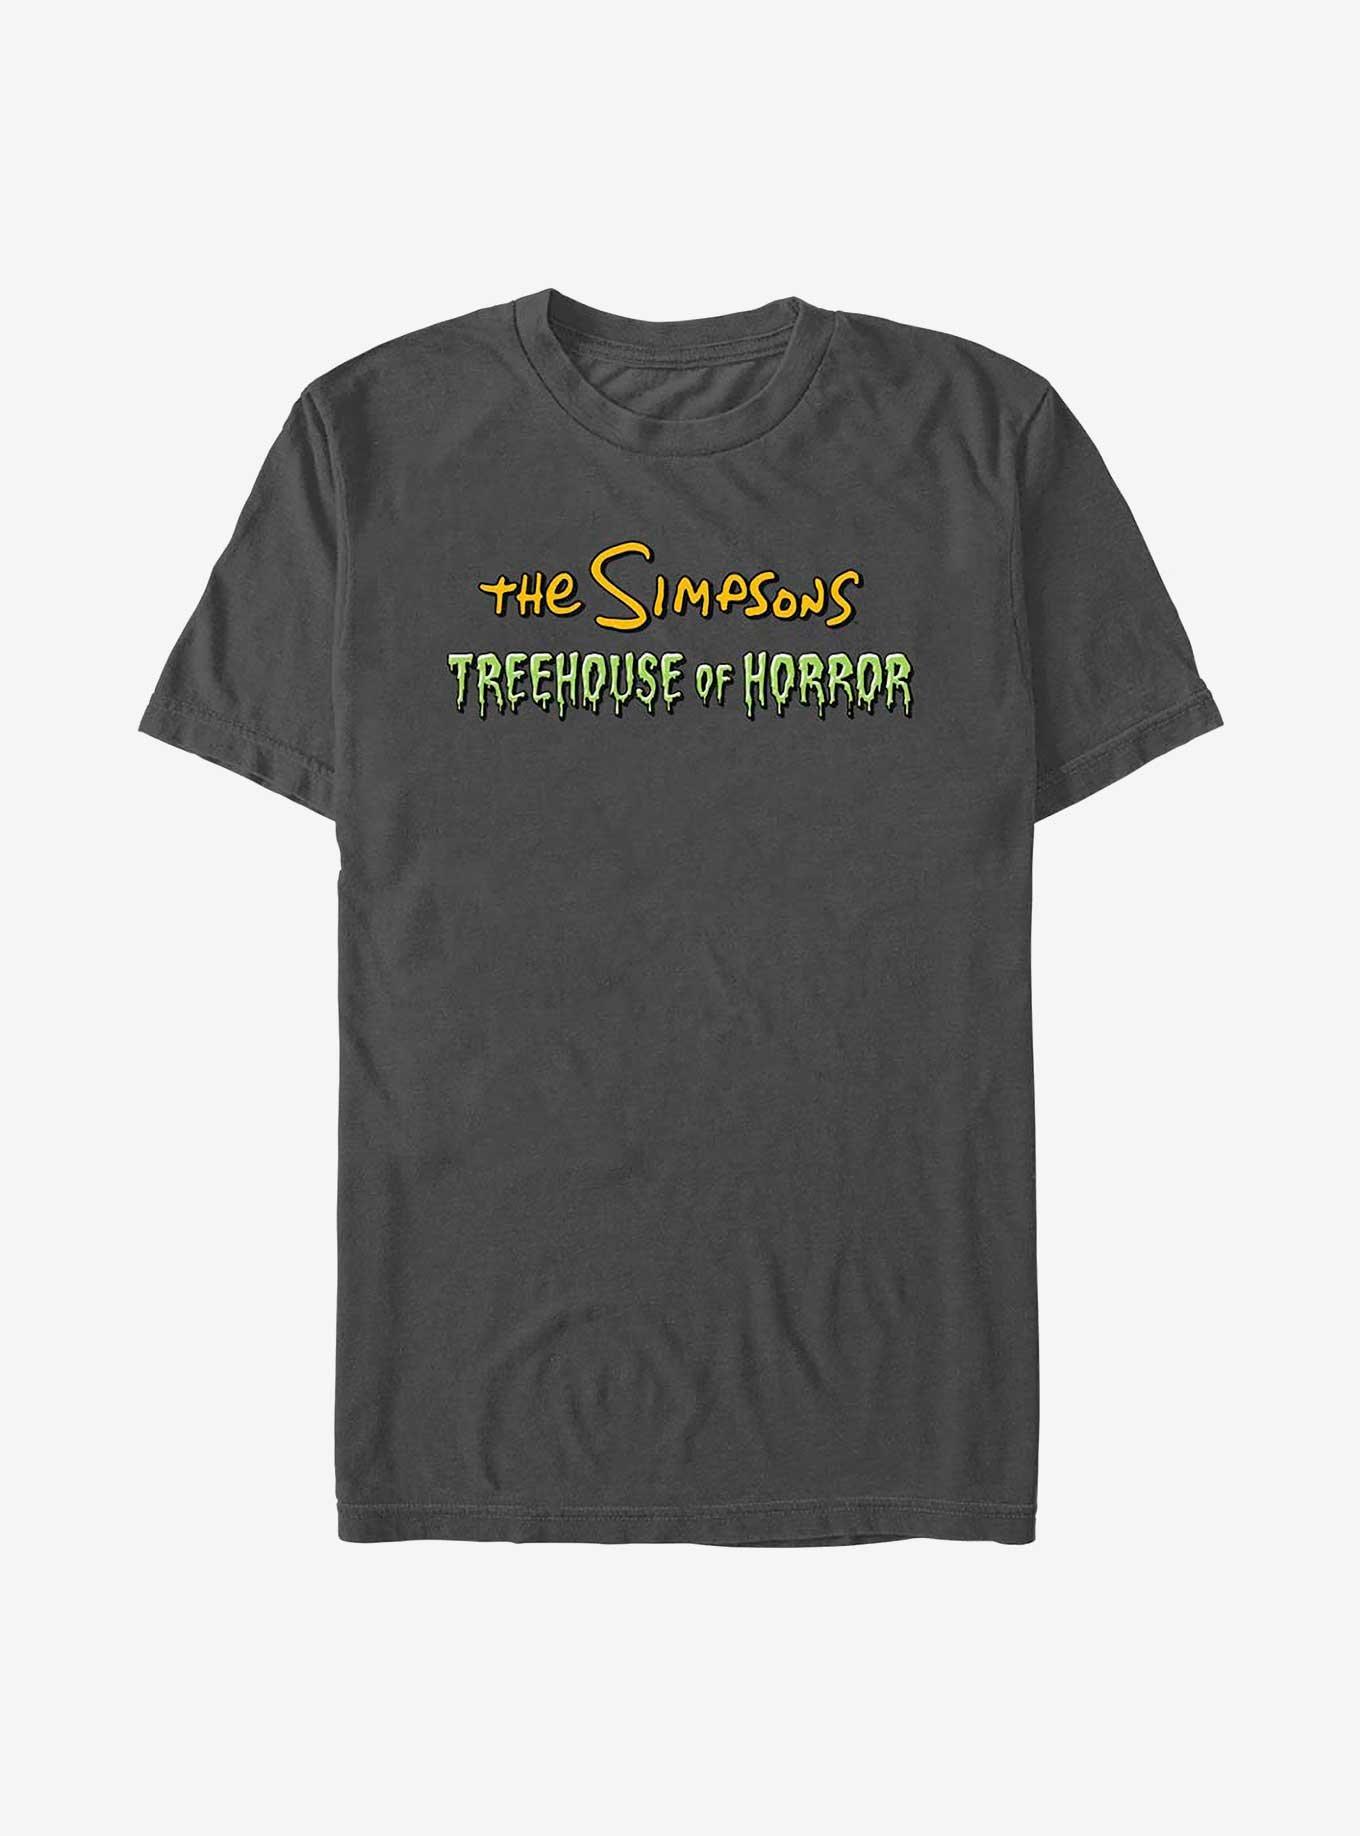 The Simpsons Treehouse of Horror Logo T-Shirt, CHARCOAL, hi-res